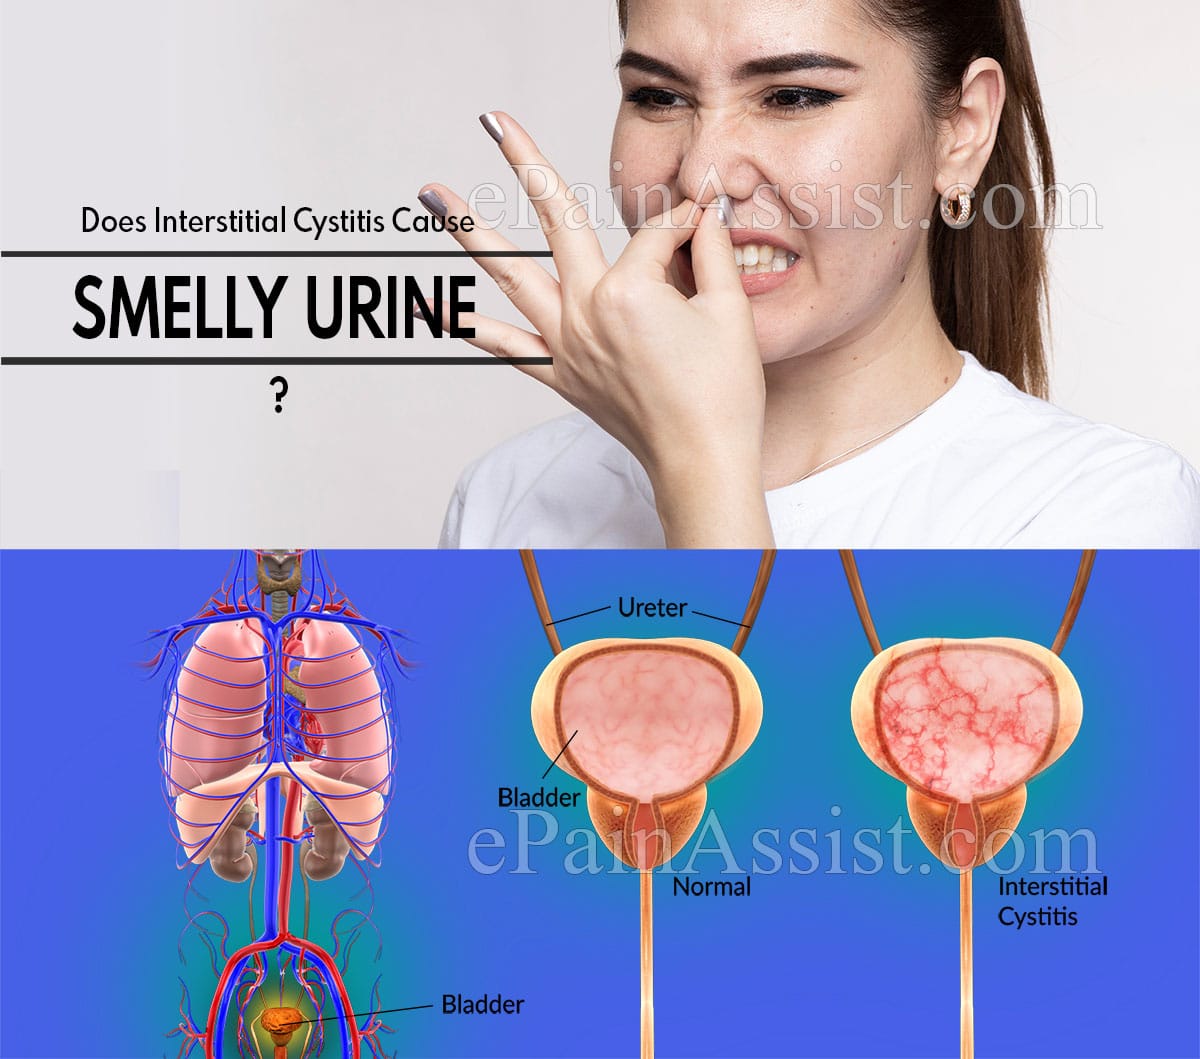 Does Interstitial Cystitis Cause Smelly Urine &  Can A Urine Test Detect IC?